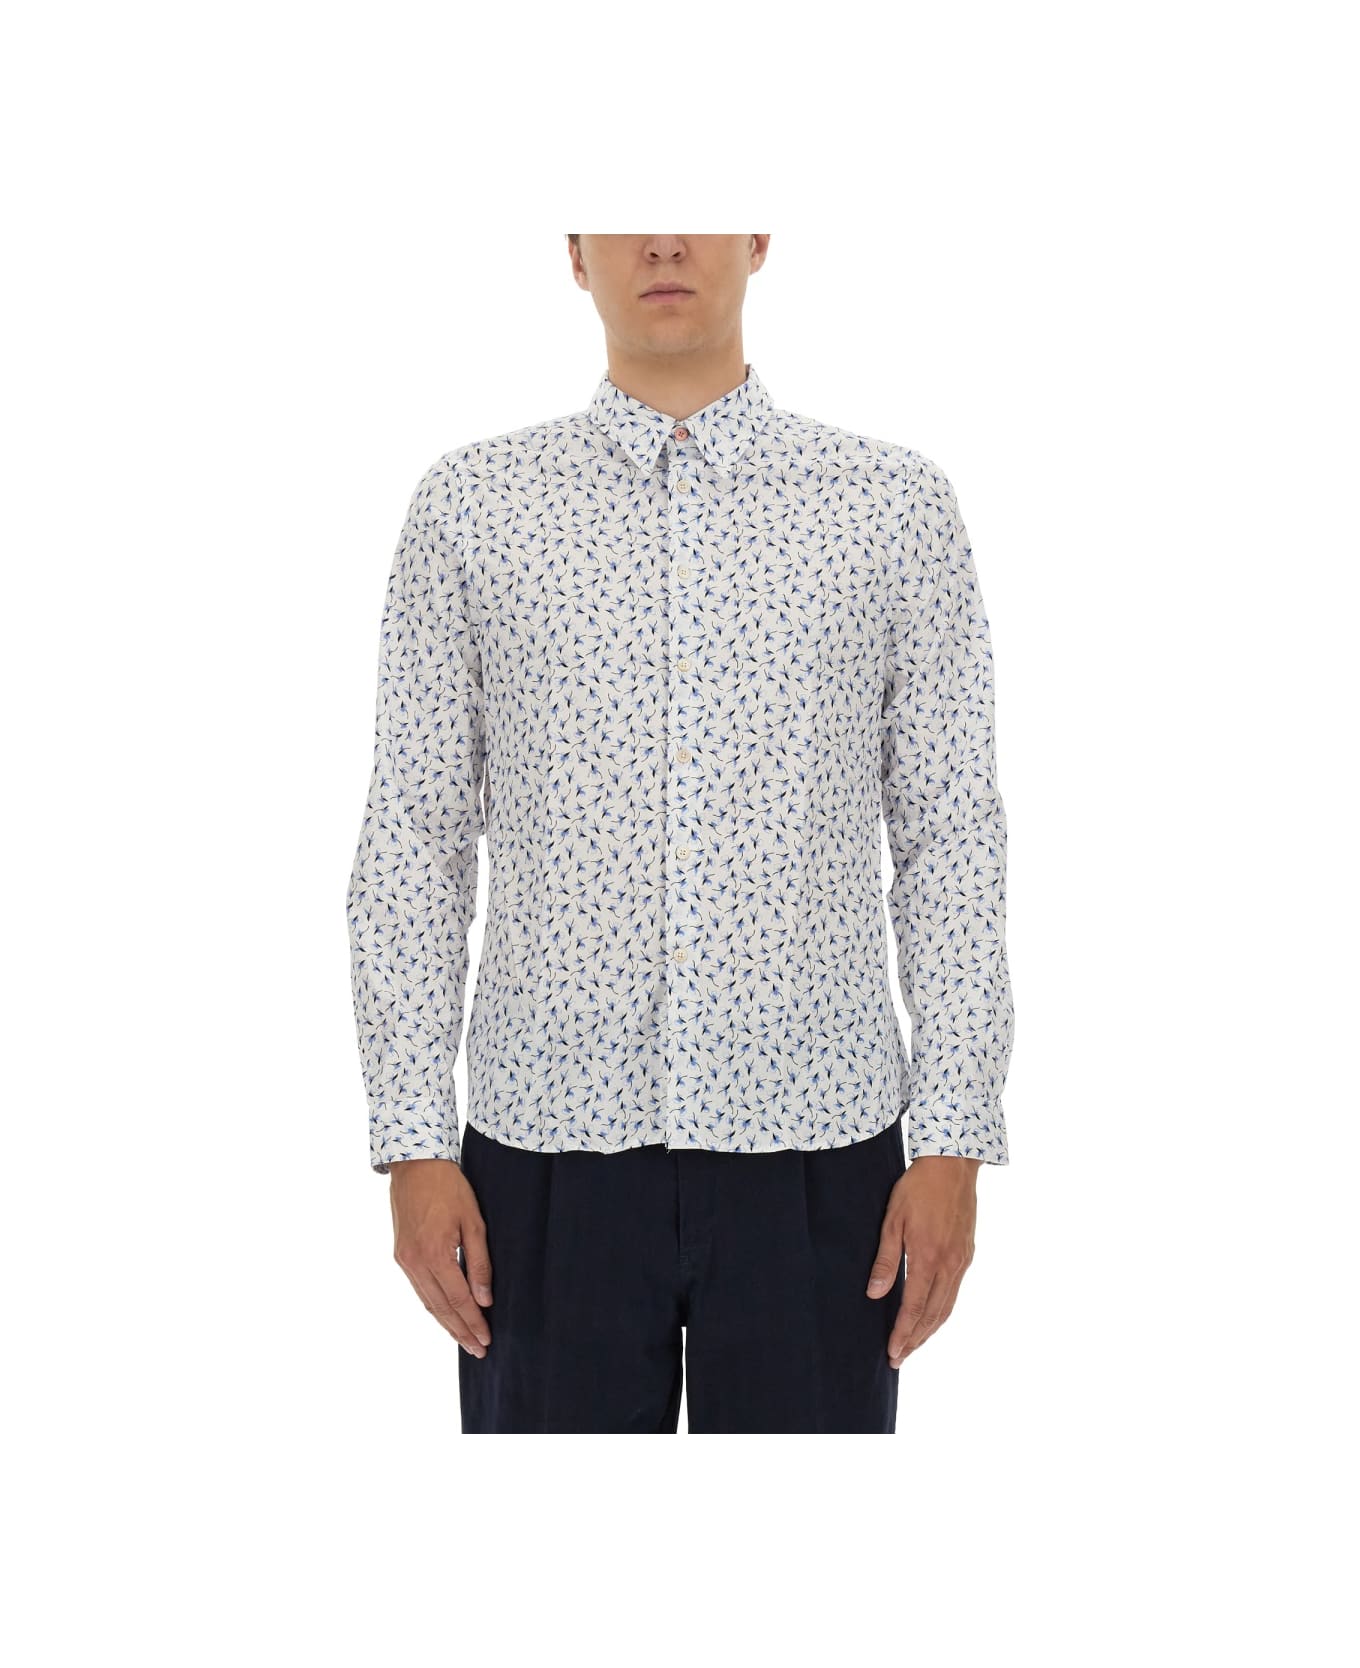 PS by Paul Smith Printed Shirt - WHITE シャツ